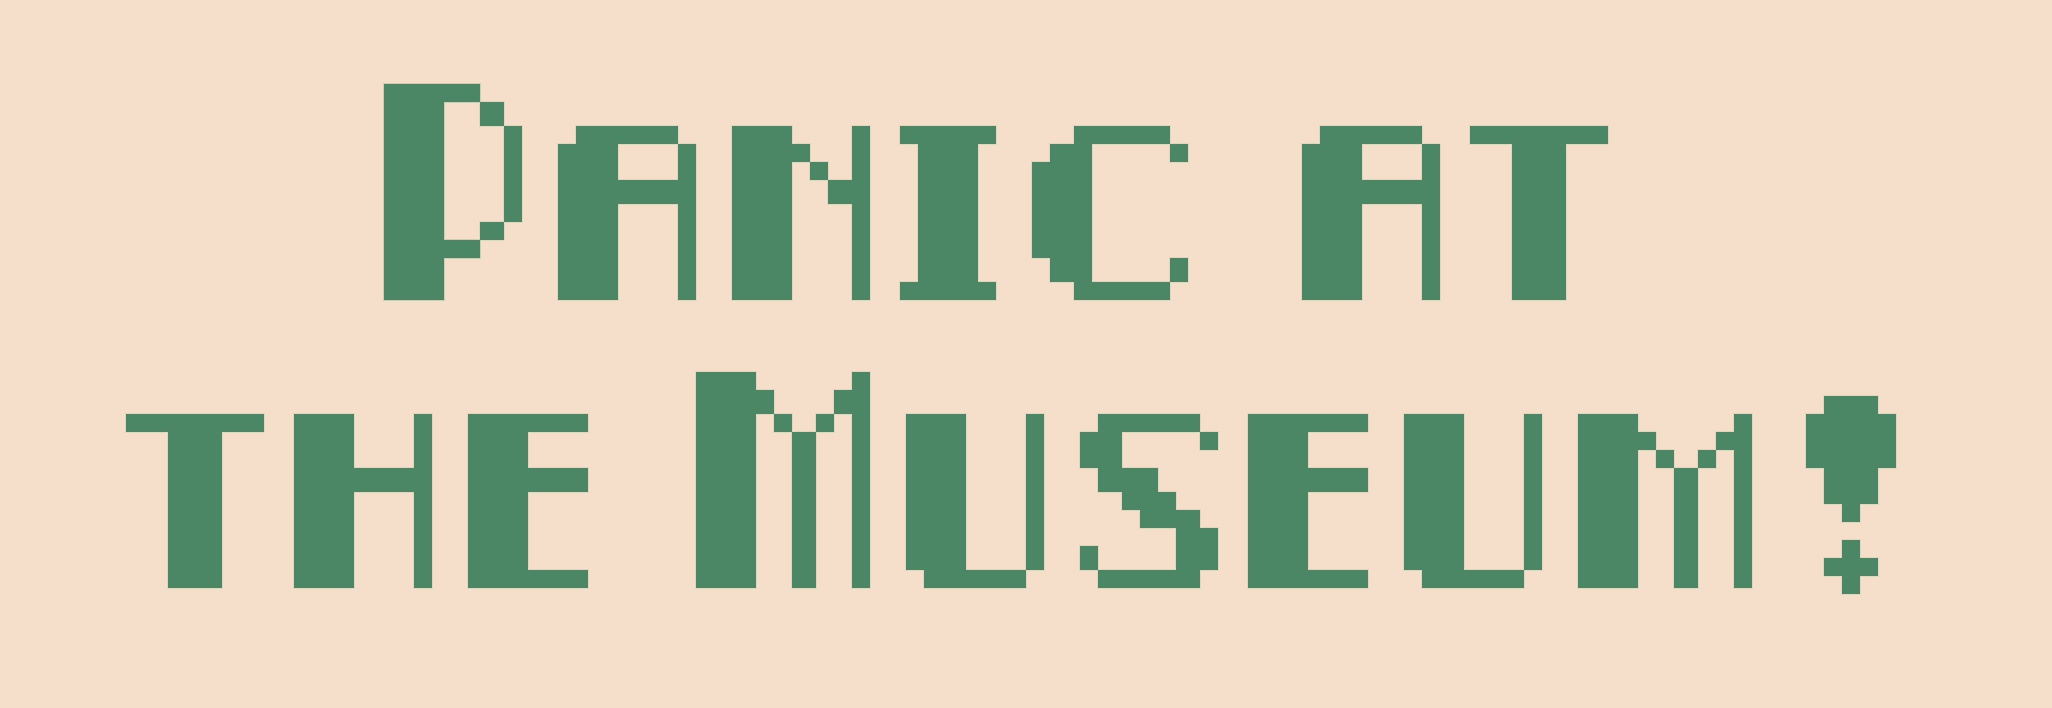 Panic at the Museum